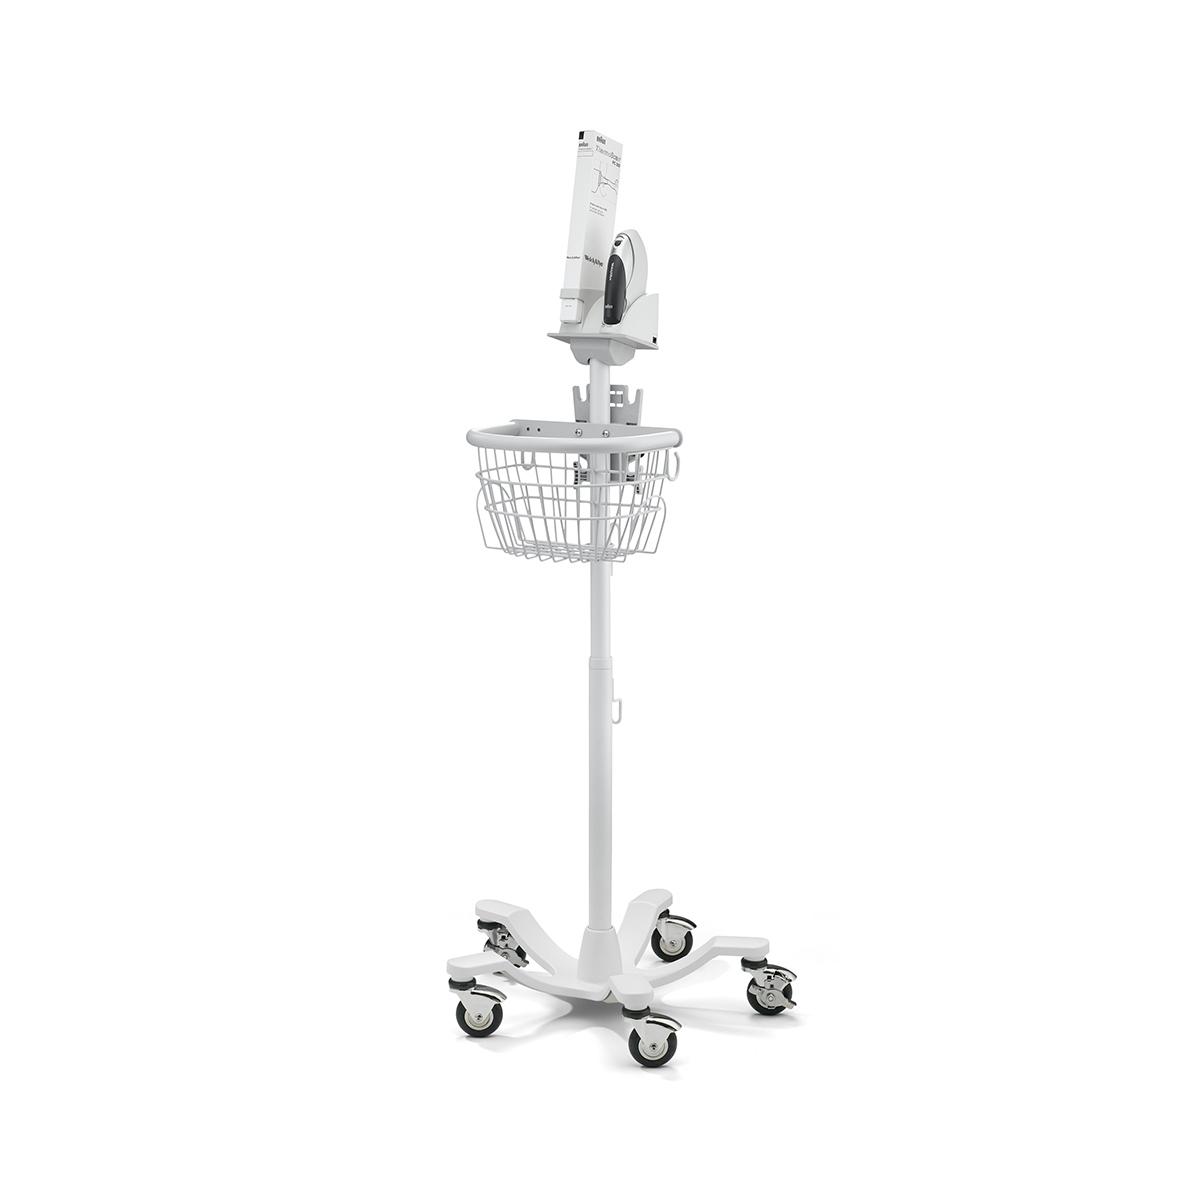 A Welch Braun ThermoScan PRO 4000 mounted on a white rolling stand. The stand has 5 caster wheels and a wire basket